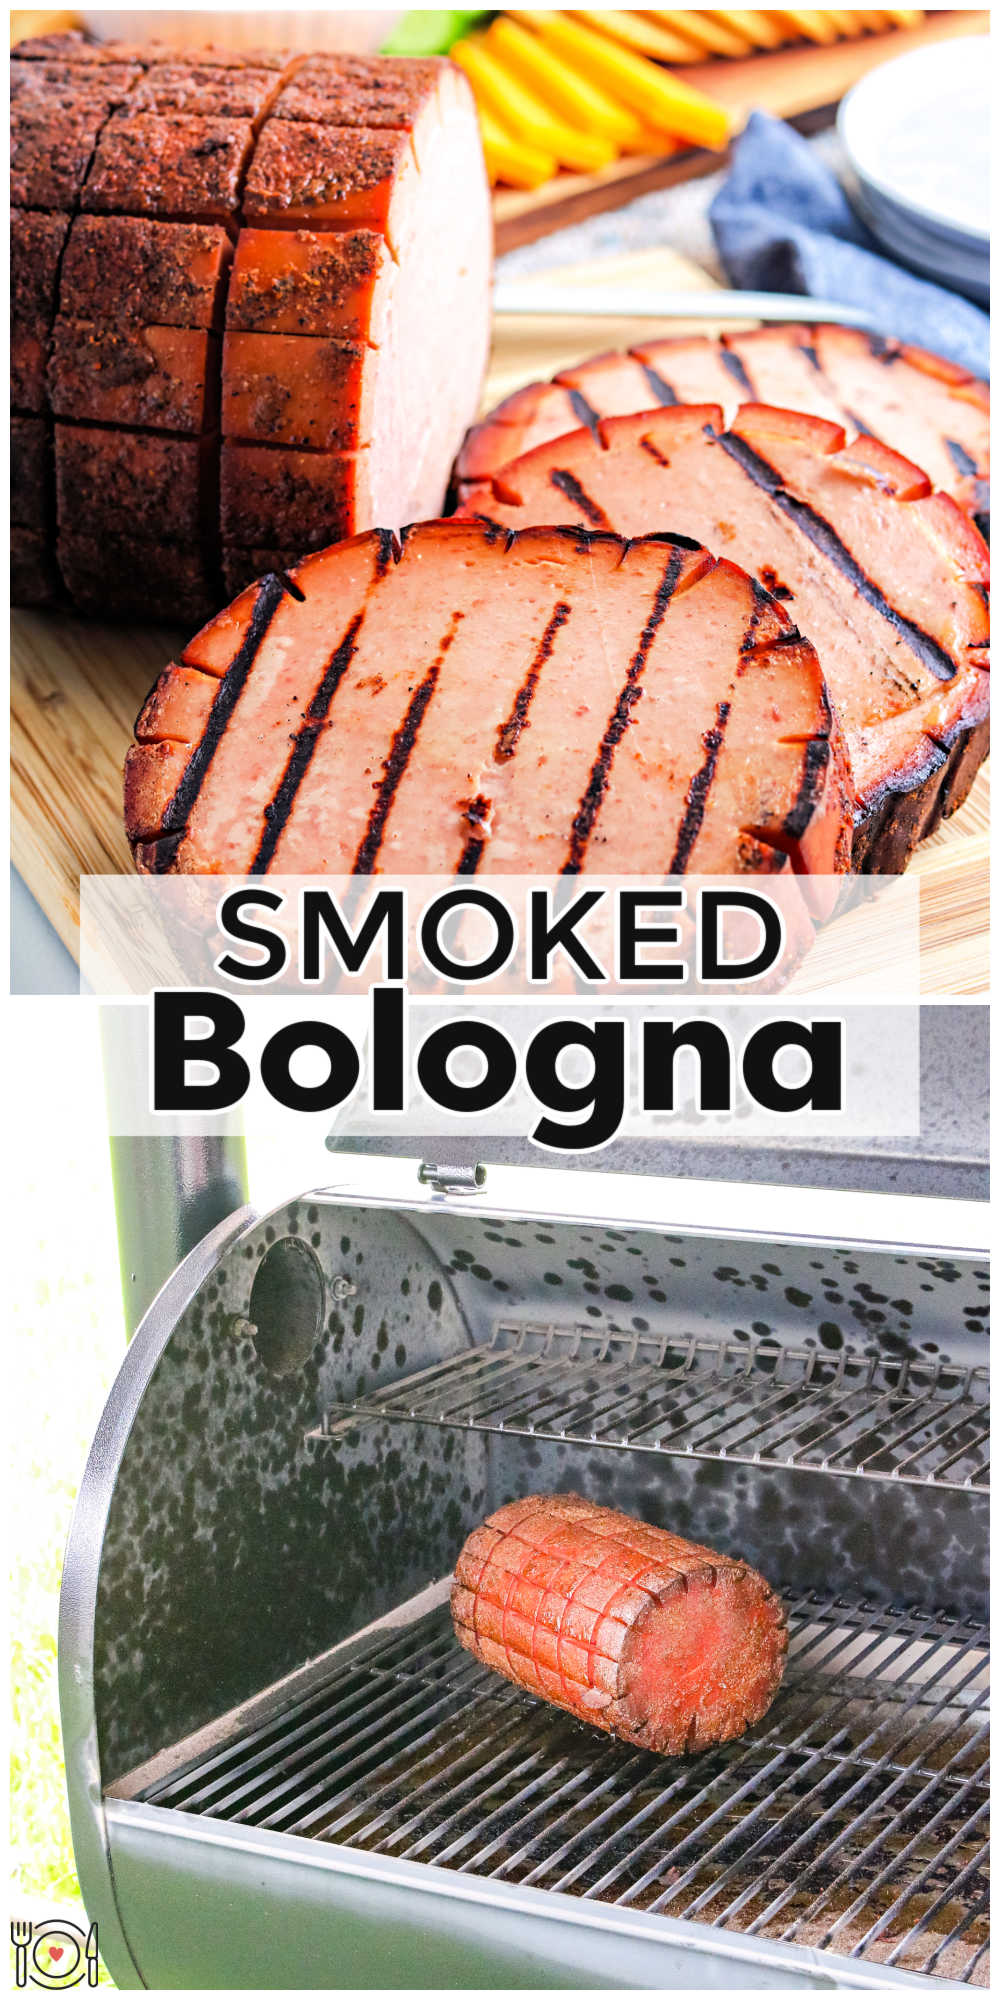 Smoked Bologna is an easy, beginner-level smoker recipe. The childhood classic got a serious upgrade with smokey, crisp edges and rich flavor. via @foodfolksandfun